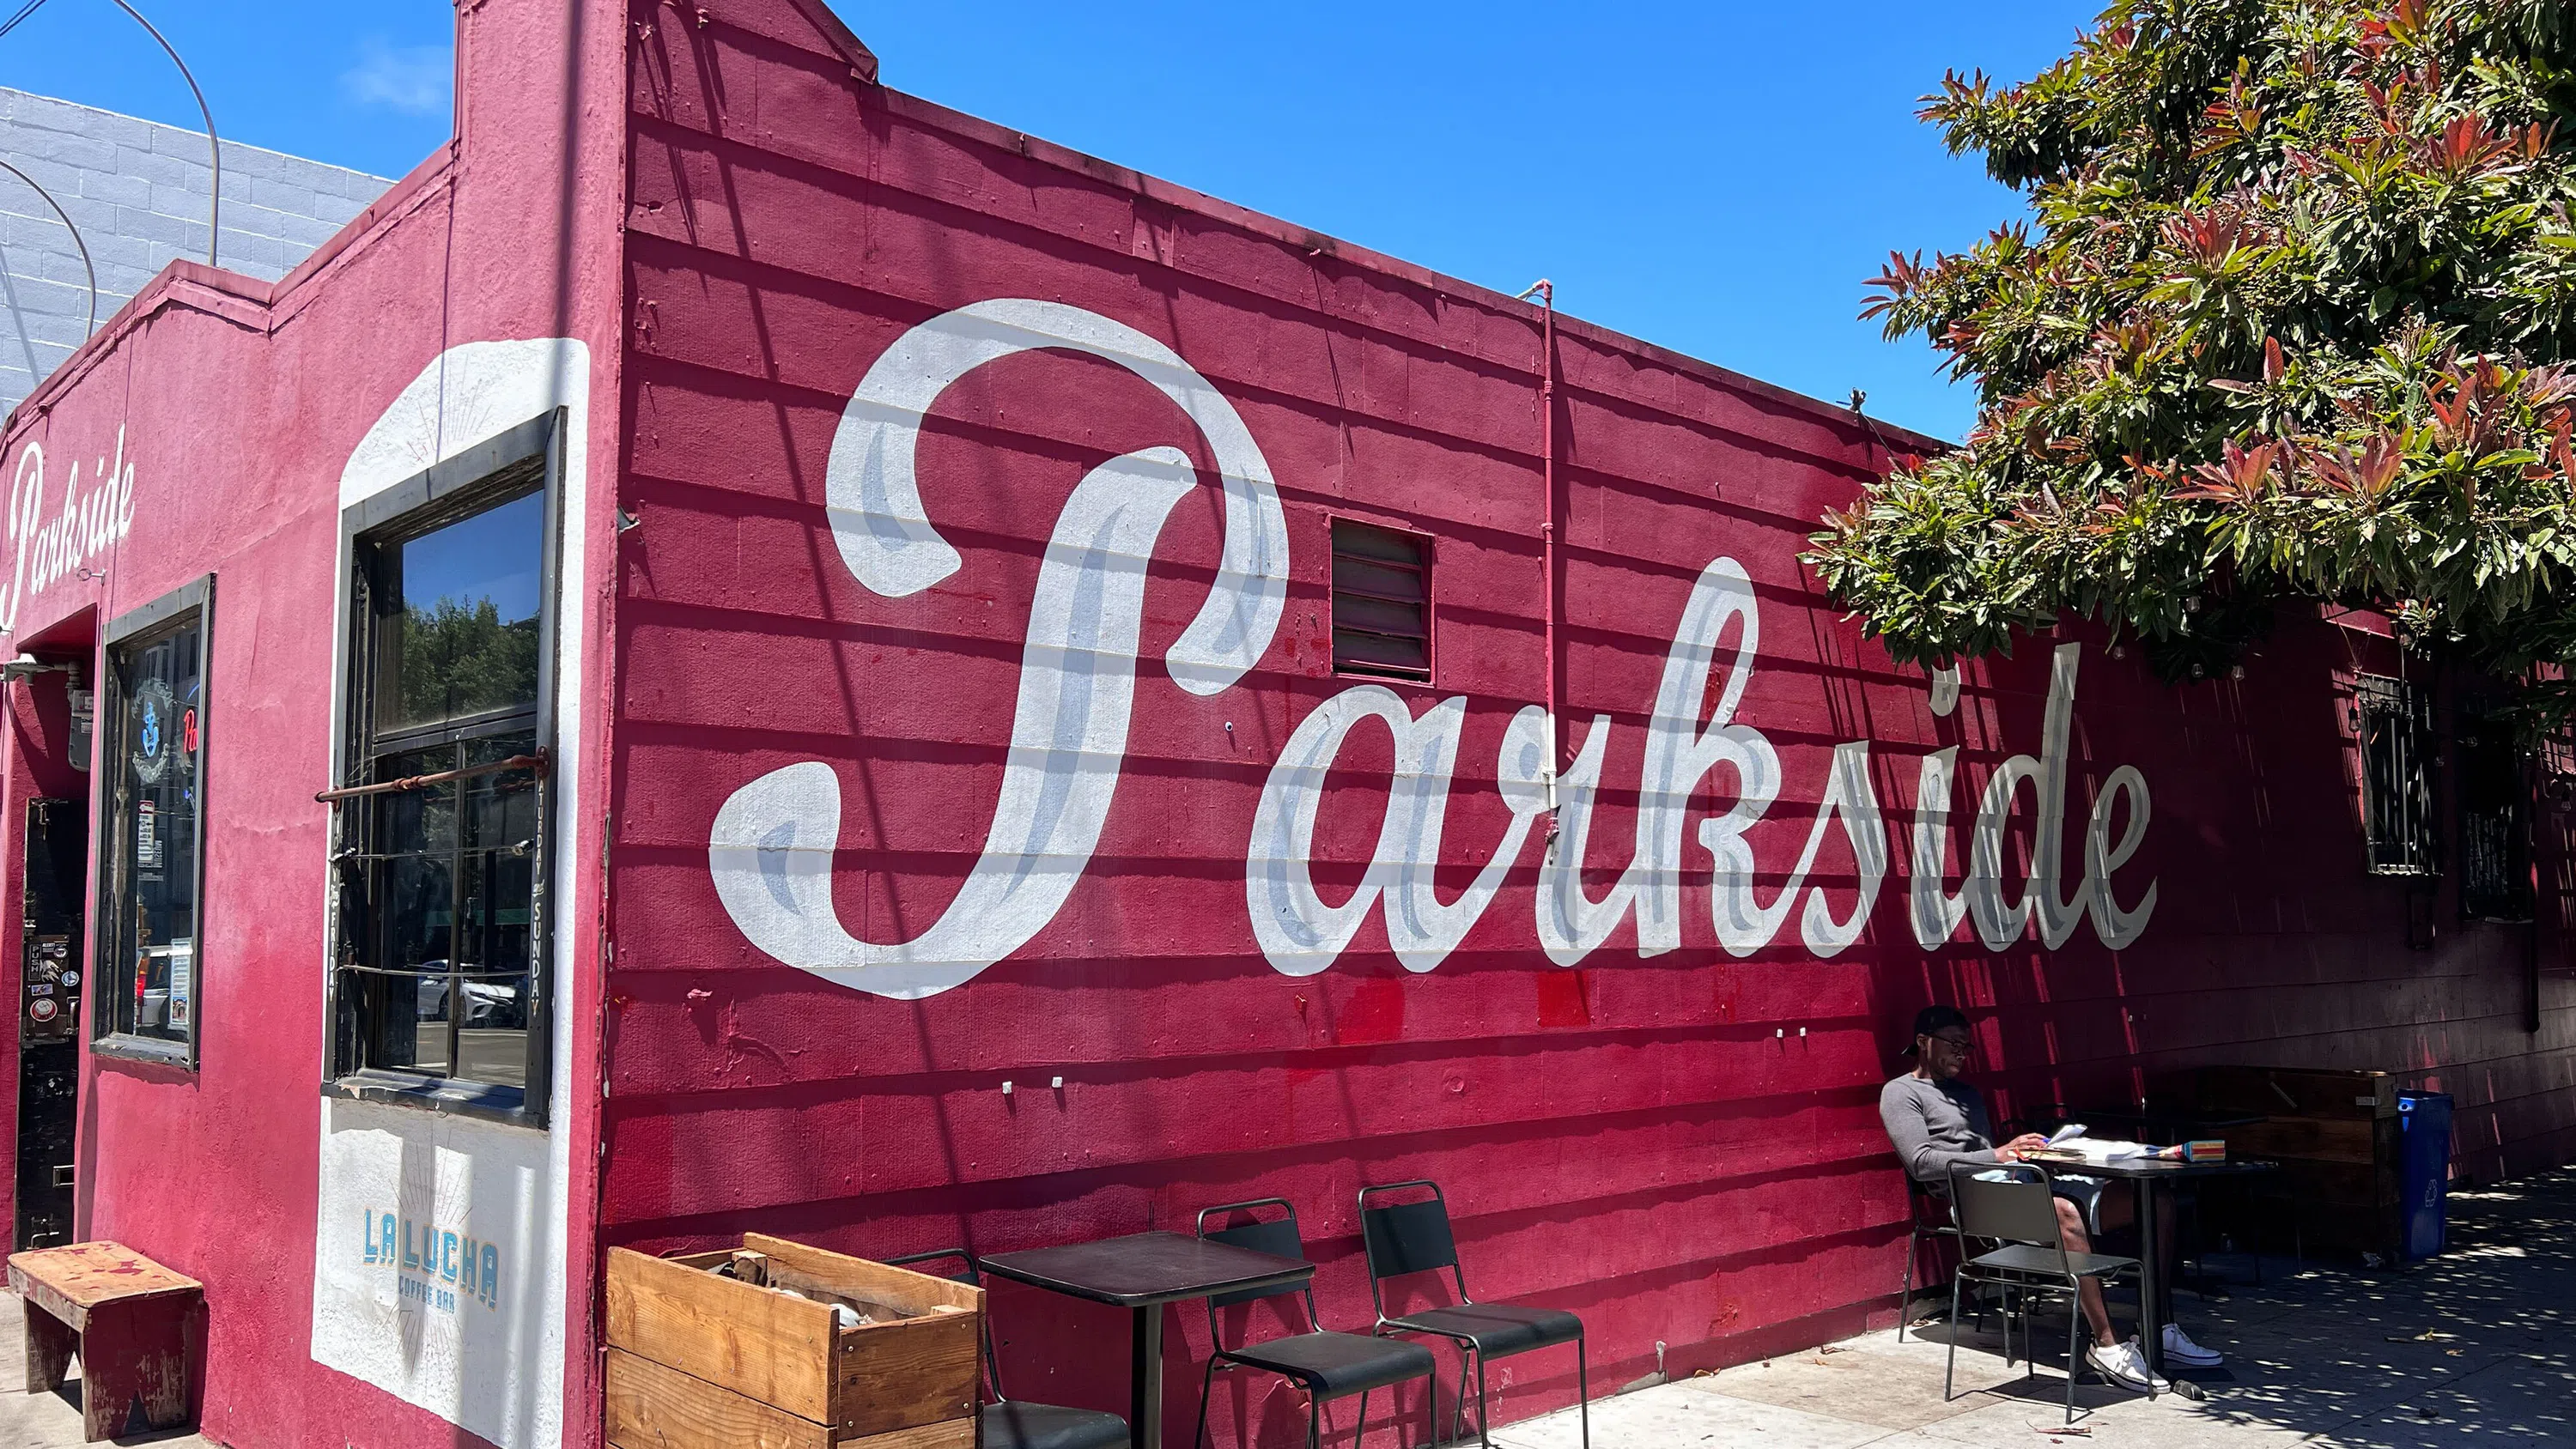 Exterior view of Thee Parkside bar - a building painted in red with white lettering painted on the side. 